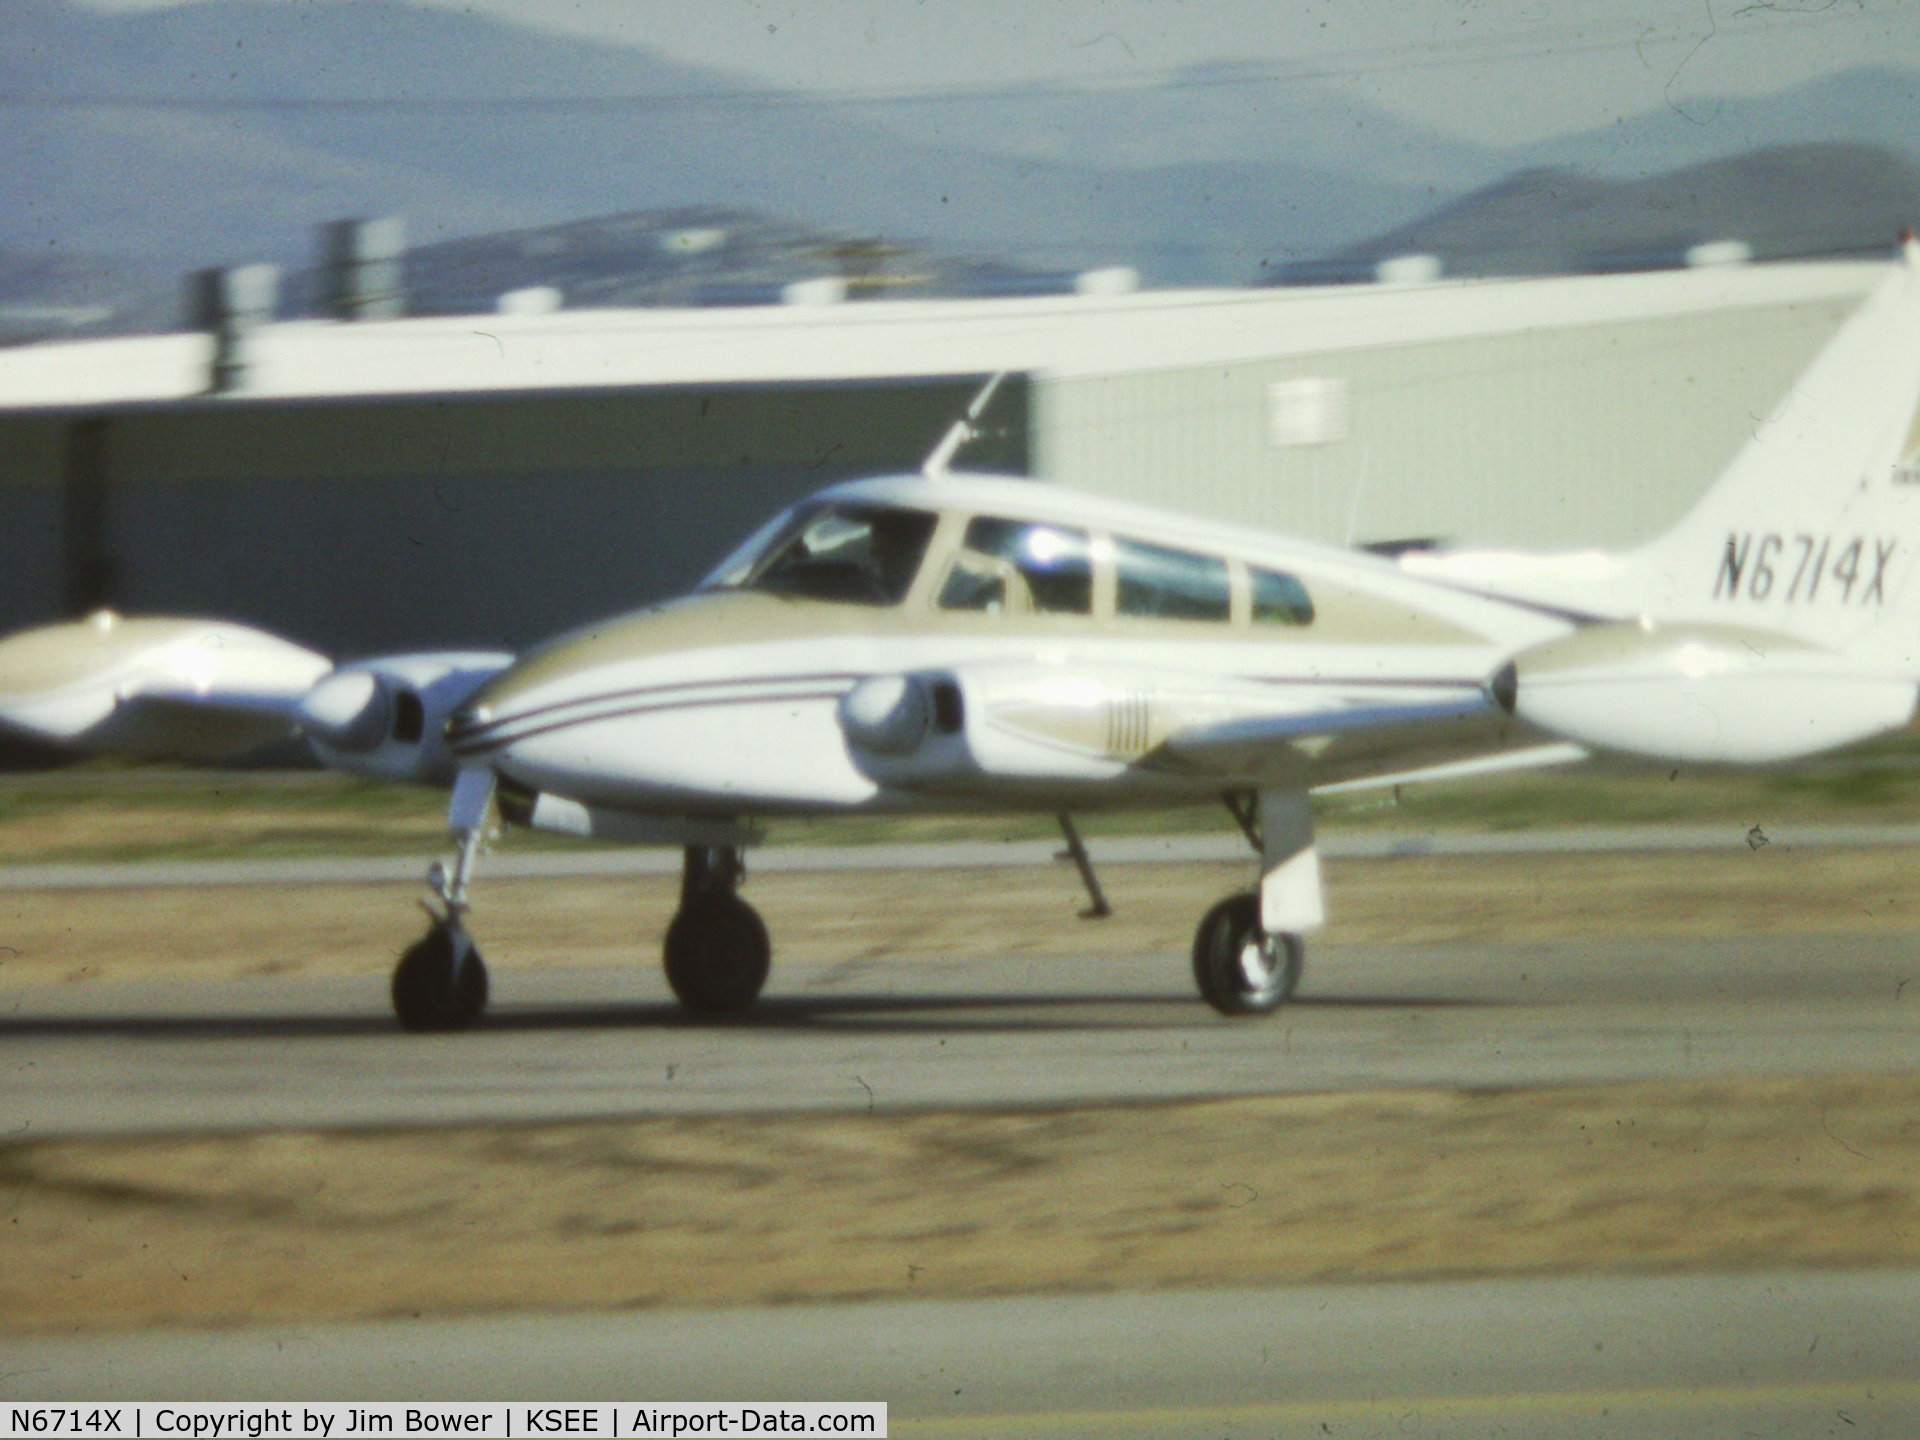 N6714X, 1960 Cessna 310F C/N 310F-0014, Taken at Gillespie Field in about 1974